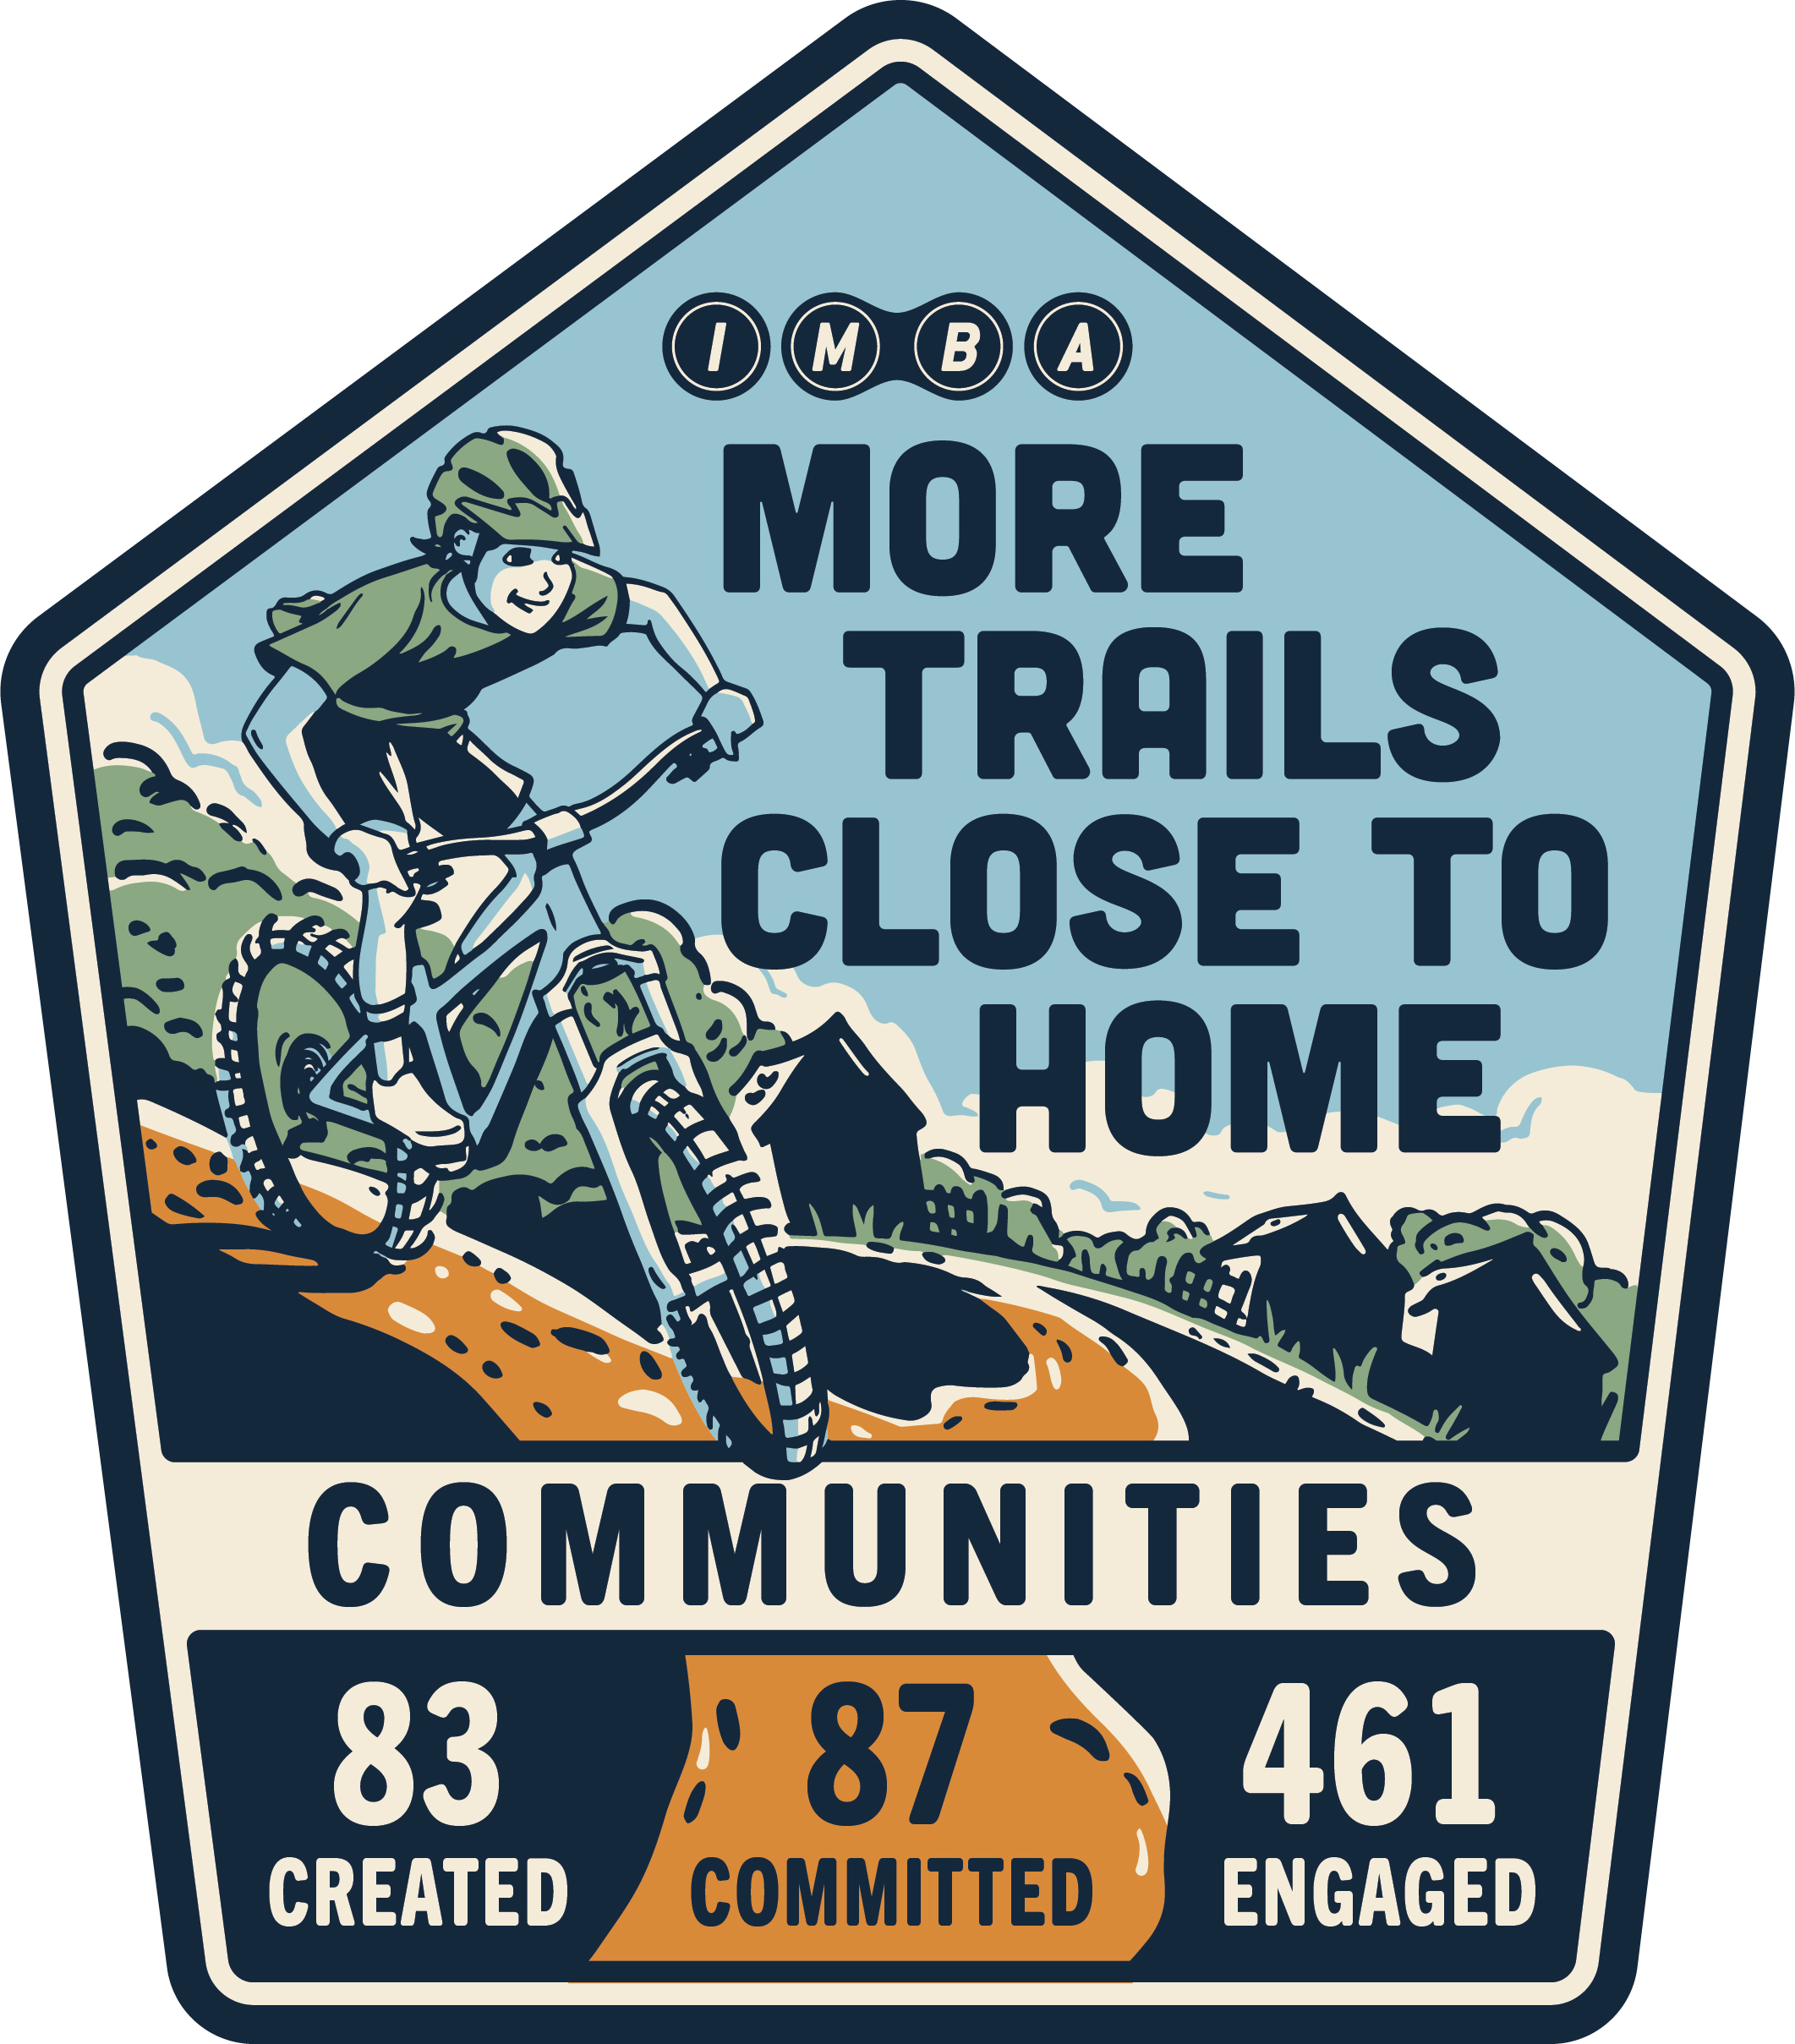 A badge for More Trails Close to Home shows the image of a mountain biker on a trail and notes 83 communities where trails have been created, 87 have committed, and 461 have engaged in the process.